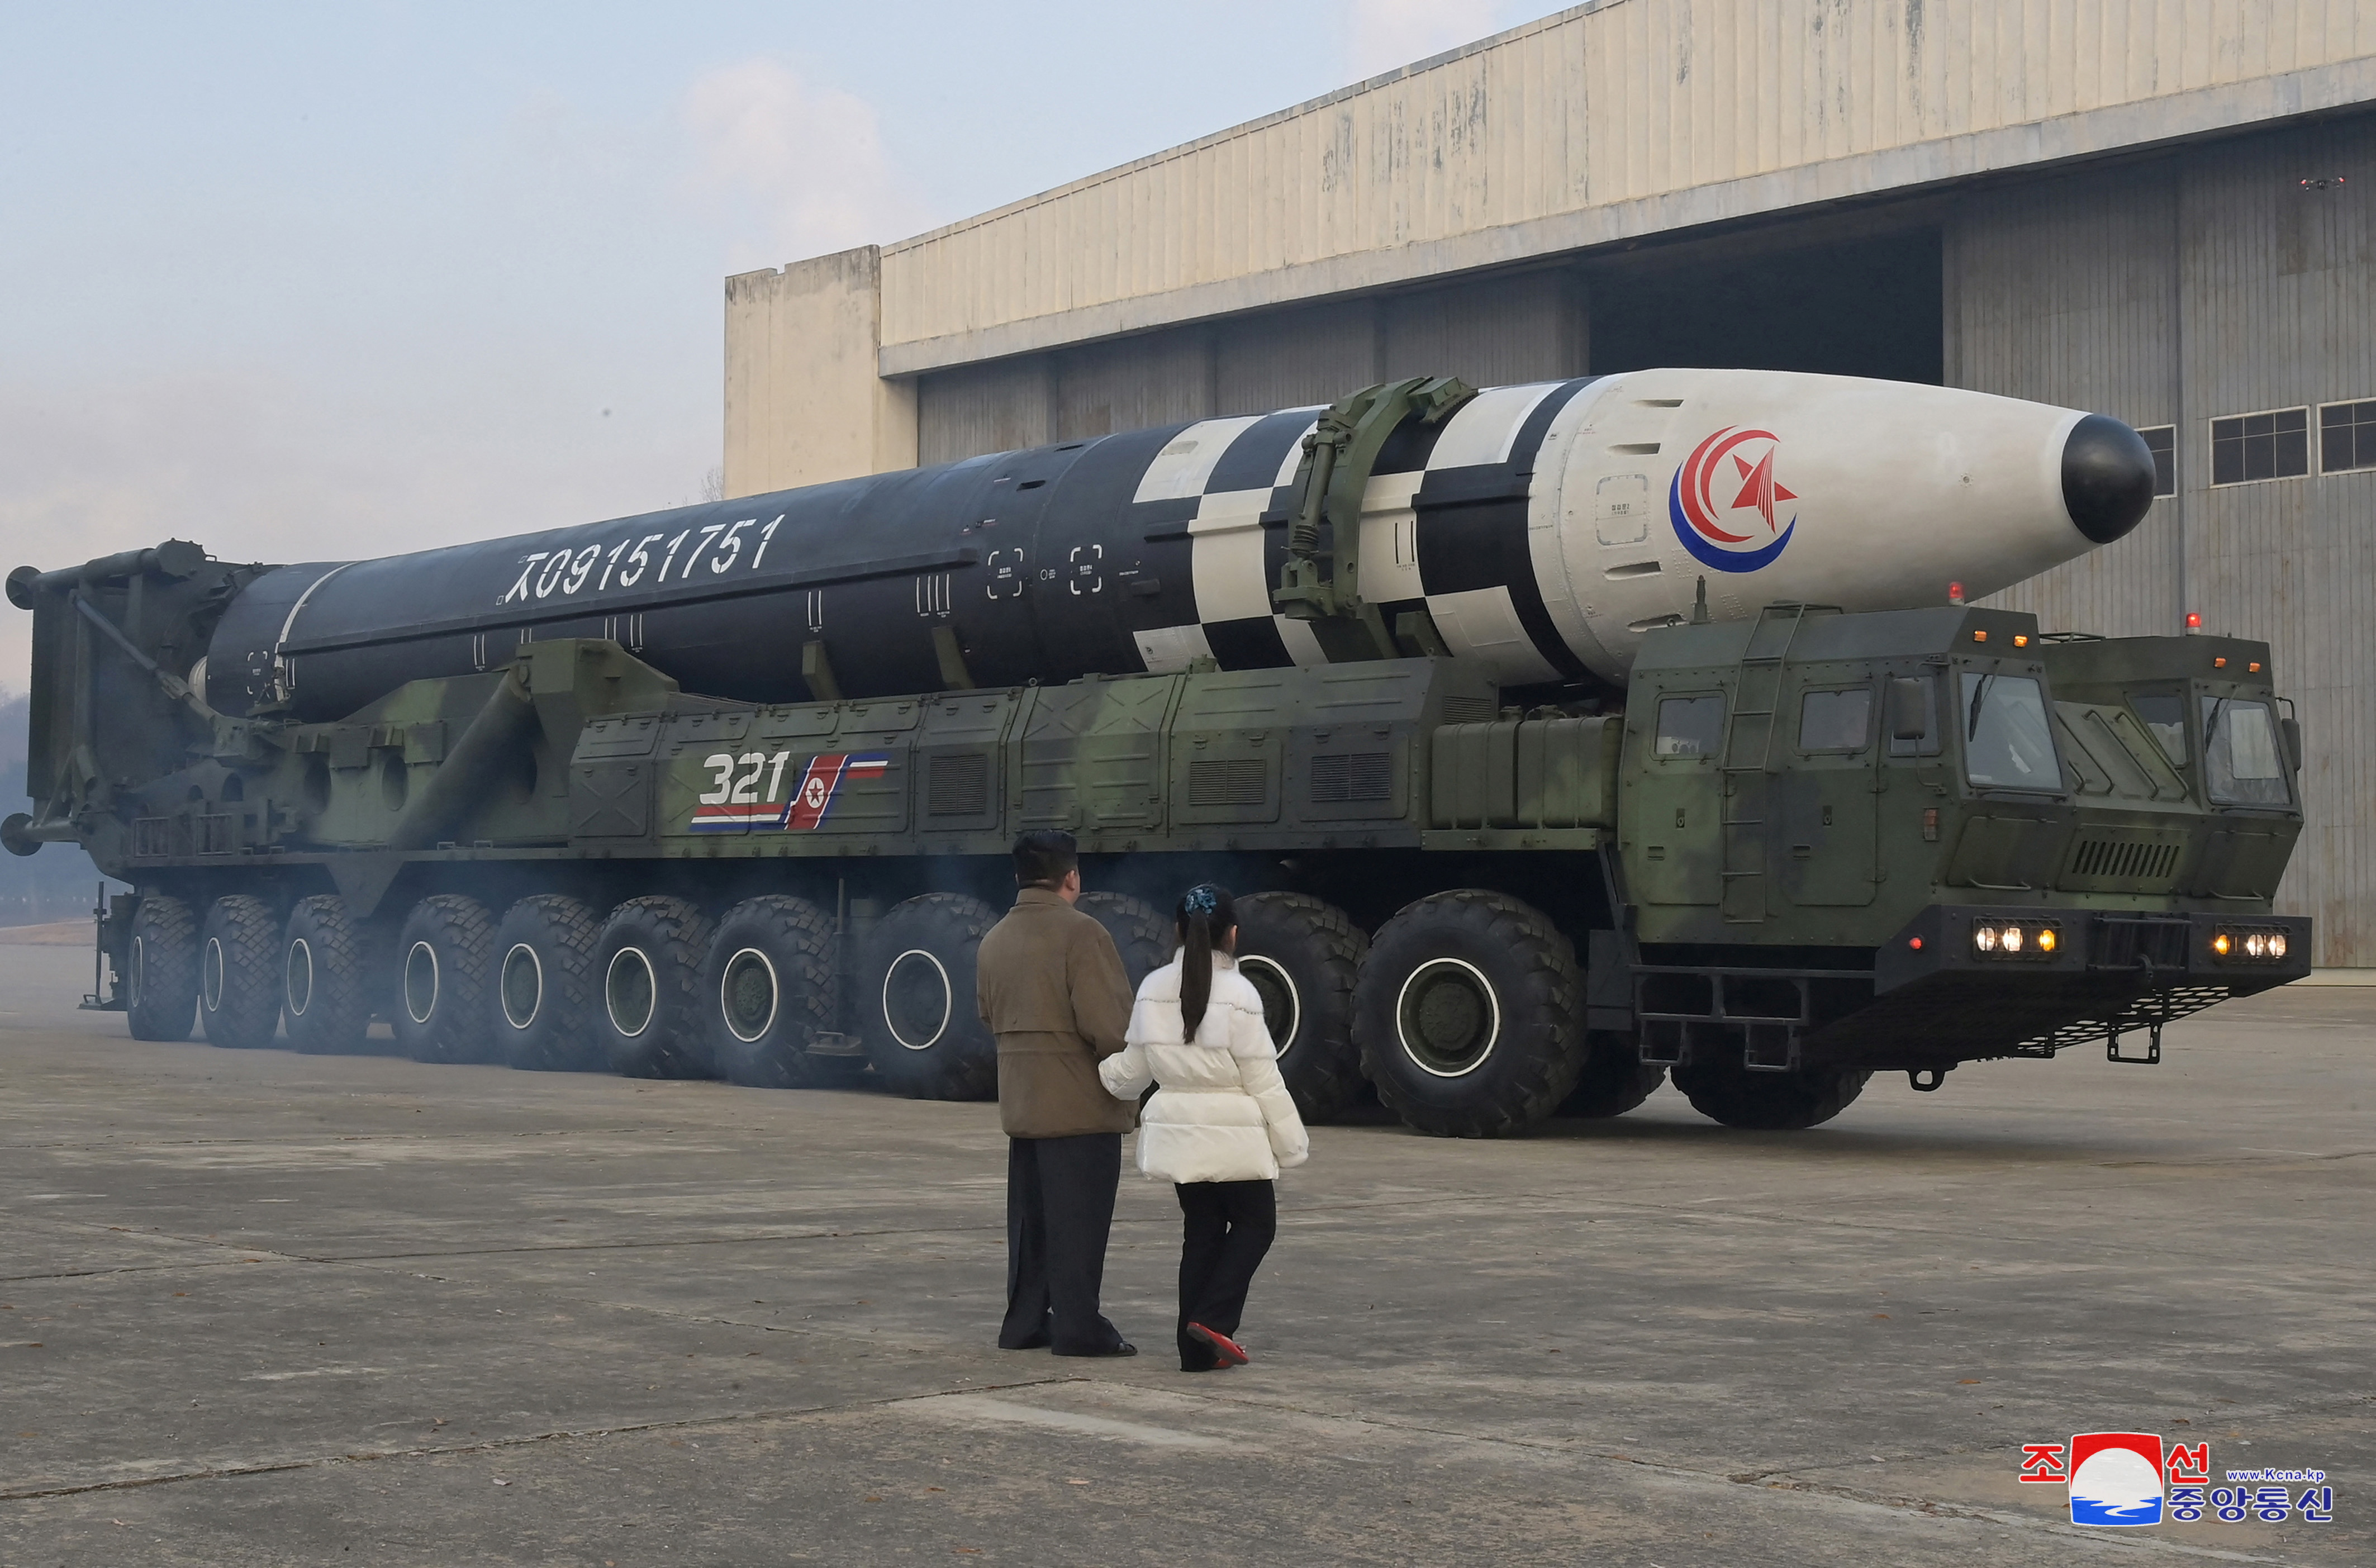 North Korean leader Kim Jong Un, along with his daughter, inspects an ICBM in this undated photo released by KCNA